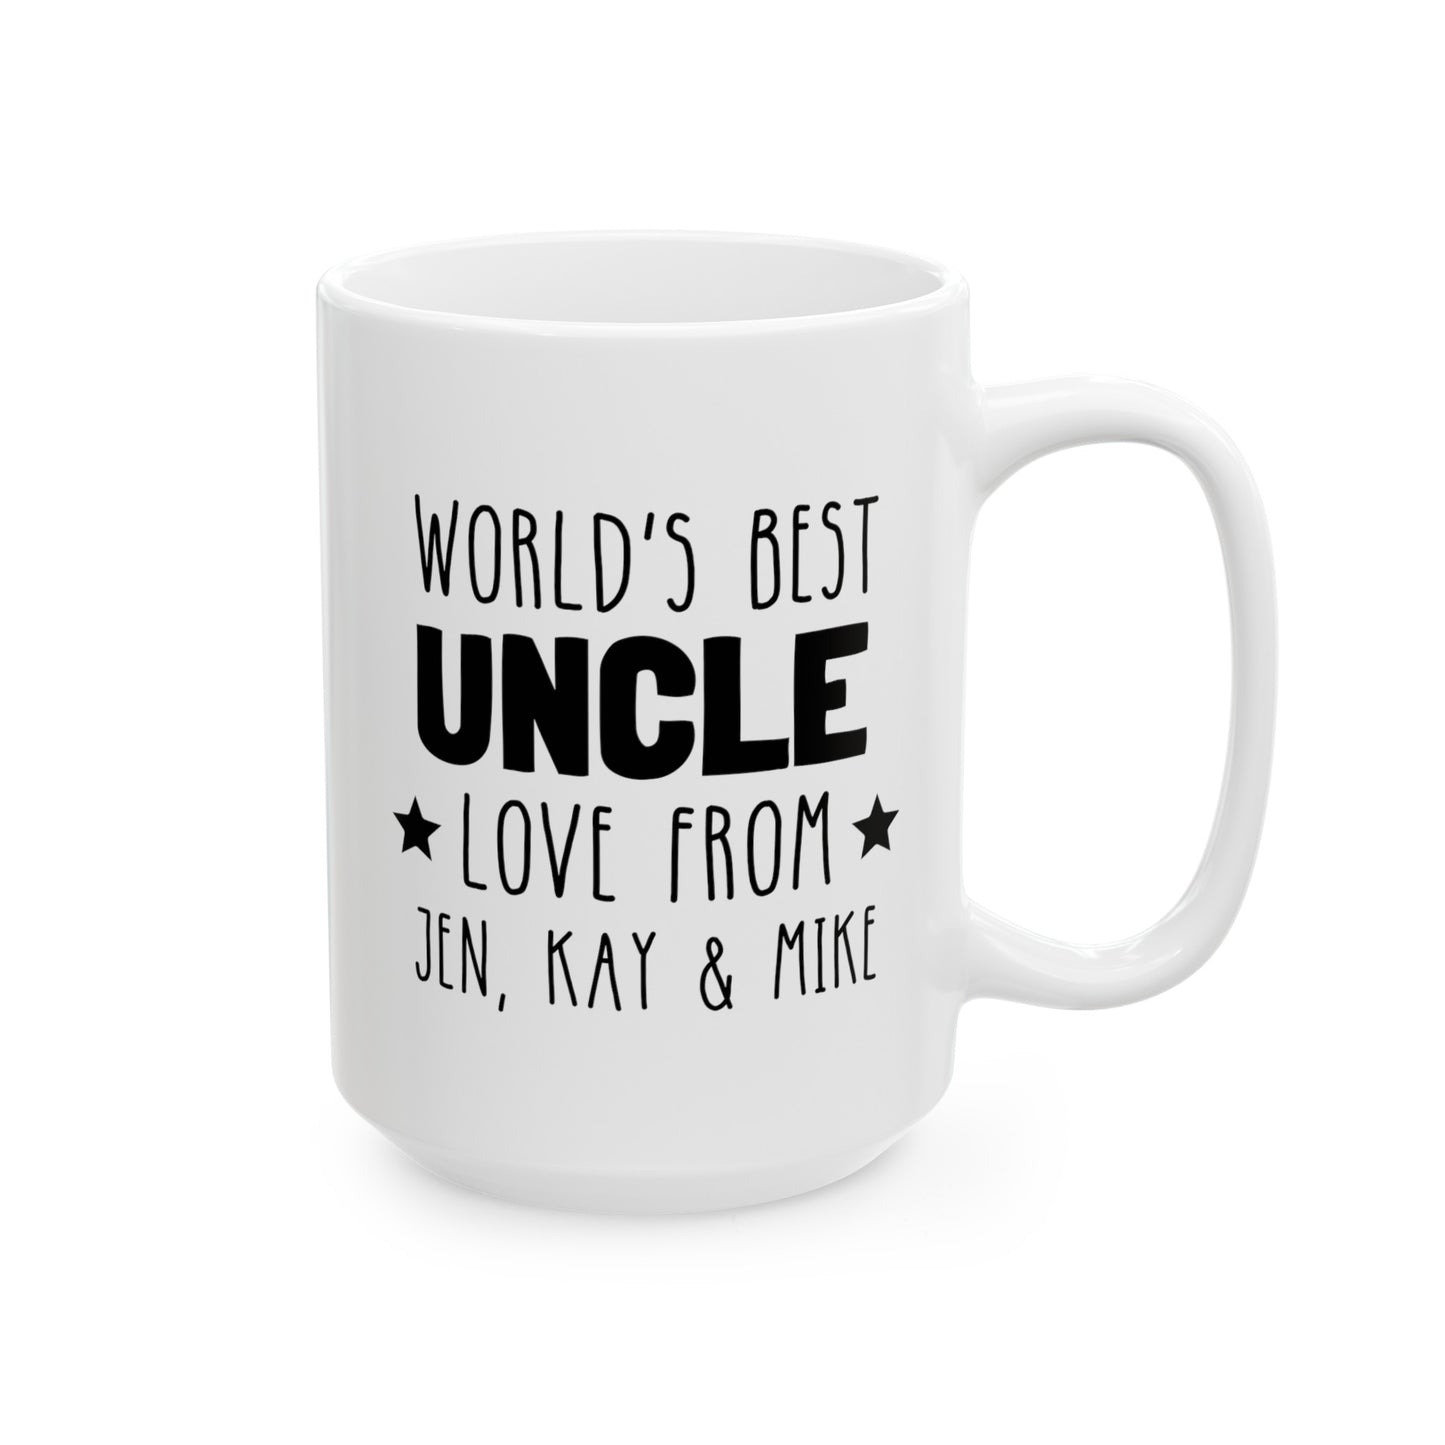 Personalized World's Best Uncle 15oz white funny large coffee mug gift for fun uncle funcle love from nephew niece custom names waveywares wavey wares wavywares wavy wares